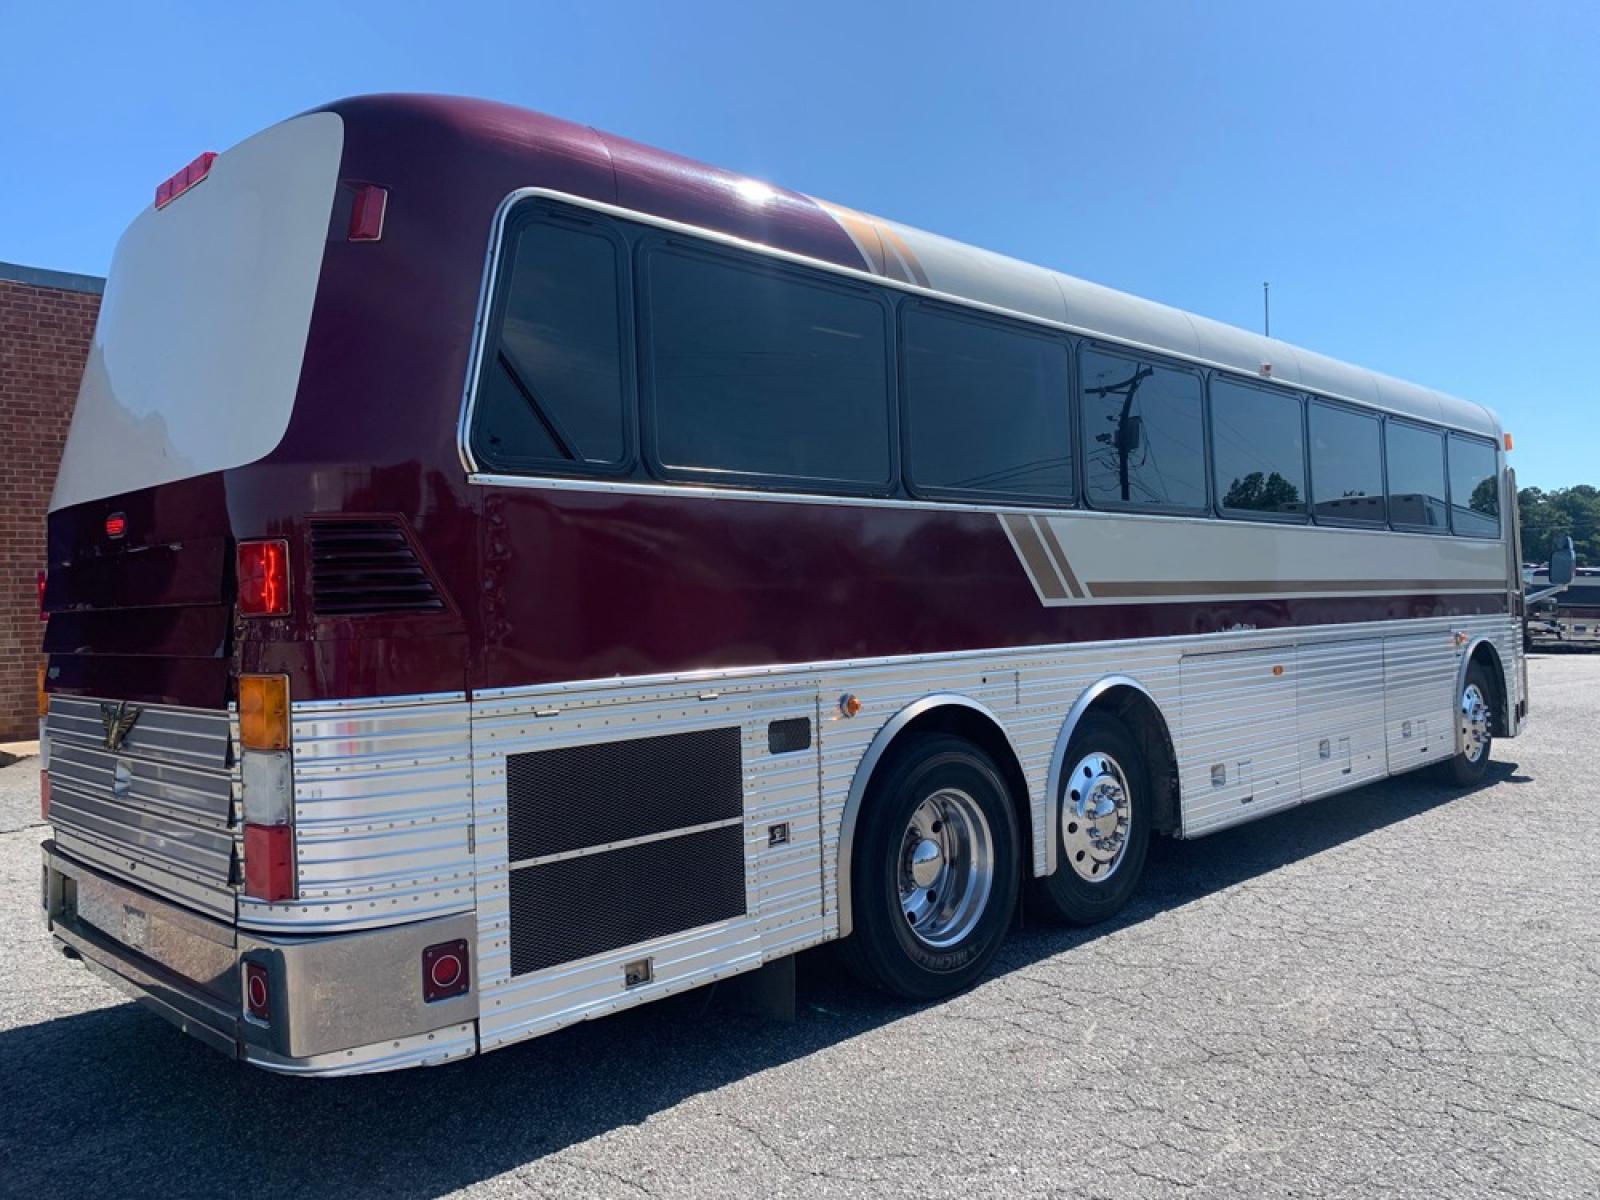 1996 White Eagle 15 Series with an Detroit Diesel Series 60 engine, Allison transmission, 0.000000, 0.000000 - 1996 EAGLE 15 Series 40’- 60 Detroit Diesel Engine, - Allison Automatic Transmission - 46 Passengers - Electric Wipers - Electric Mirrors - Alloy Wheels - 4 Monitors & DVD - Enclosed Overhead Racks – Restroom - Photo #3